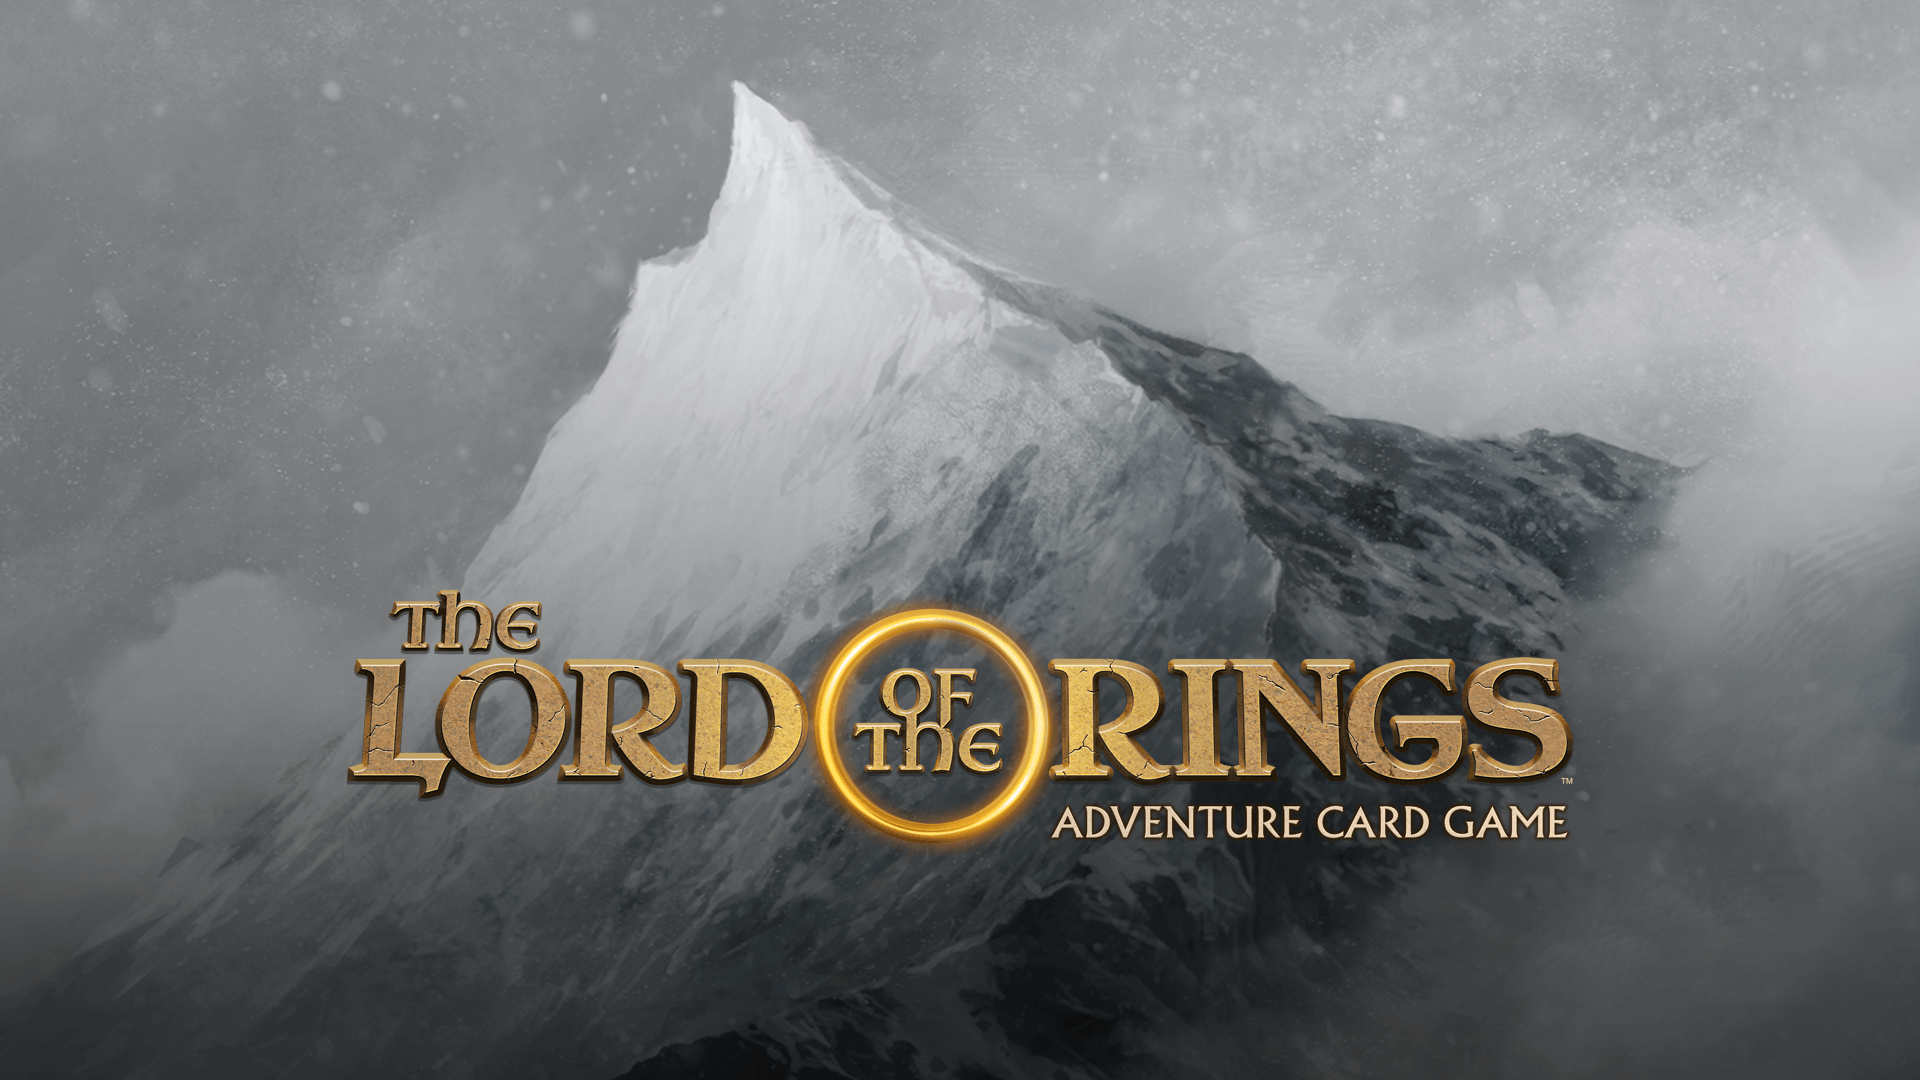 Asmodee Digital Launches The Lord of the Rings Adventure Card Game